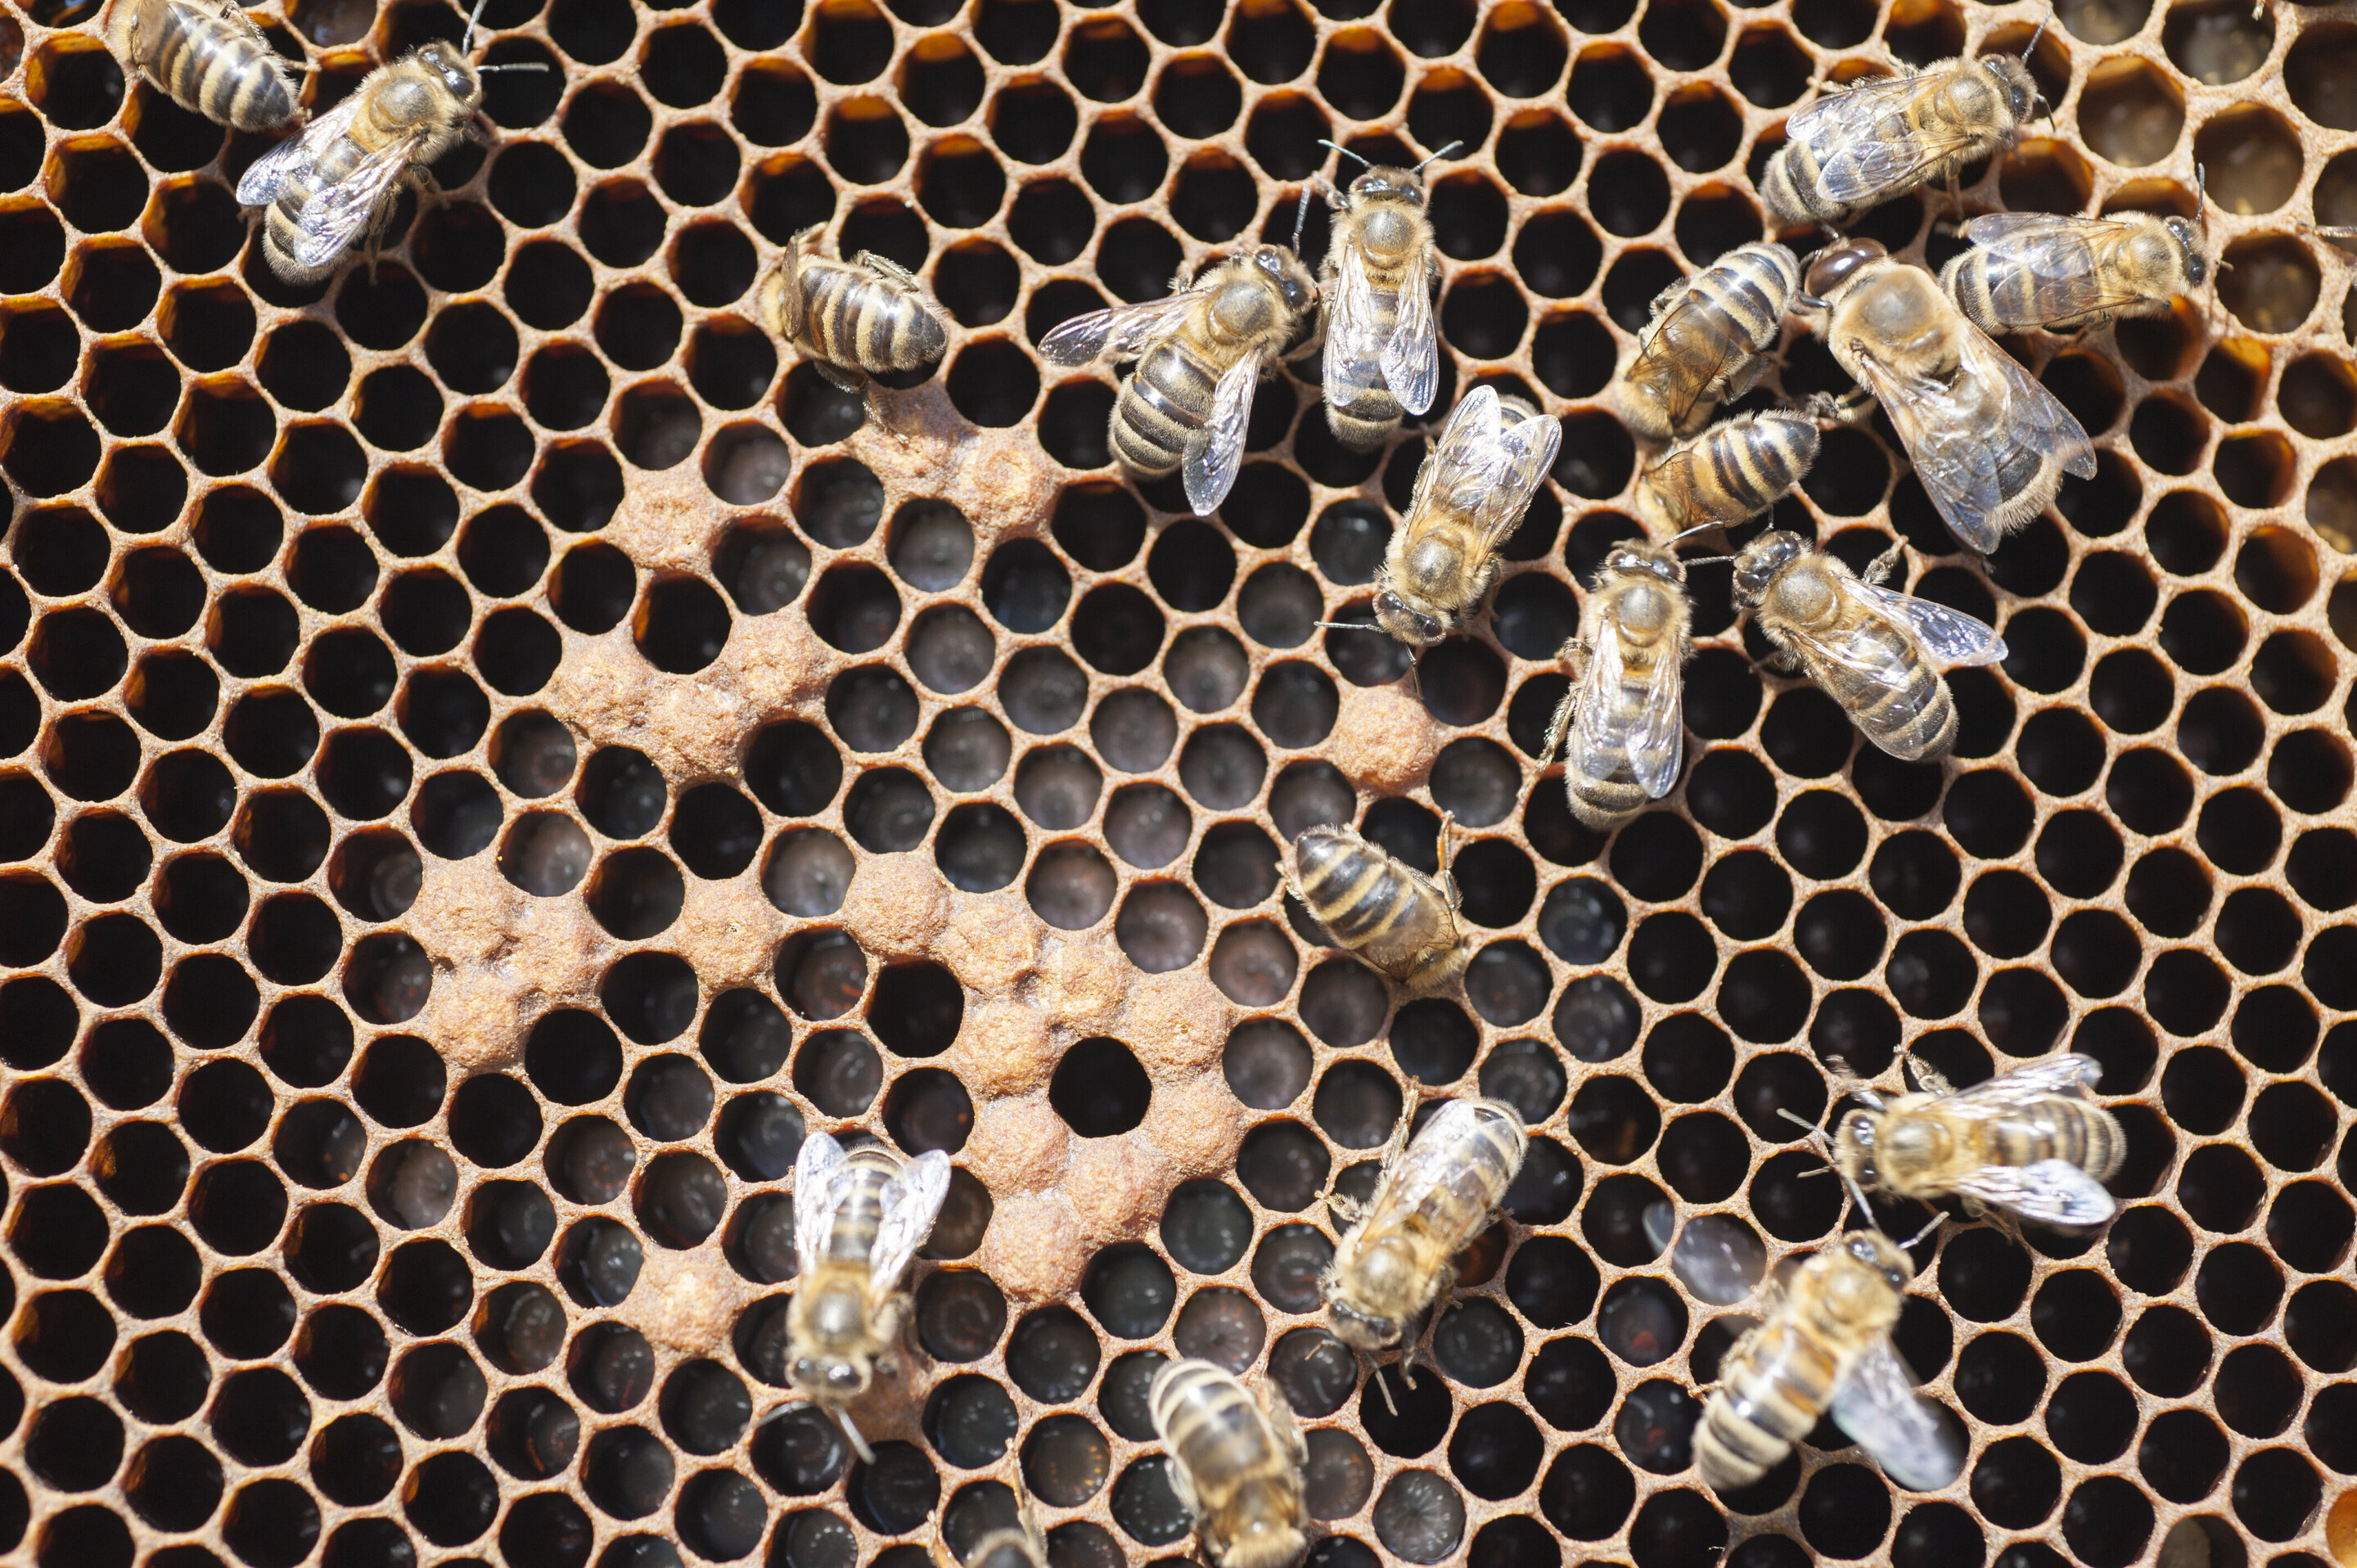 Hygienic honey bees are more resistant to destructive parasite